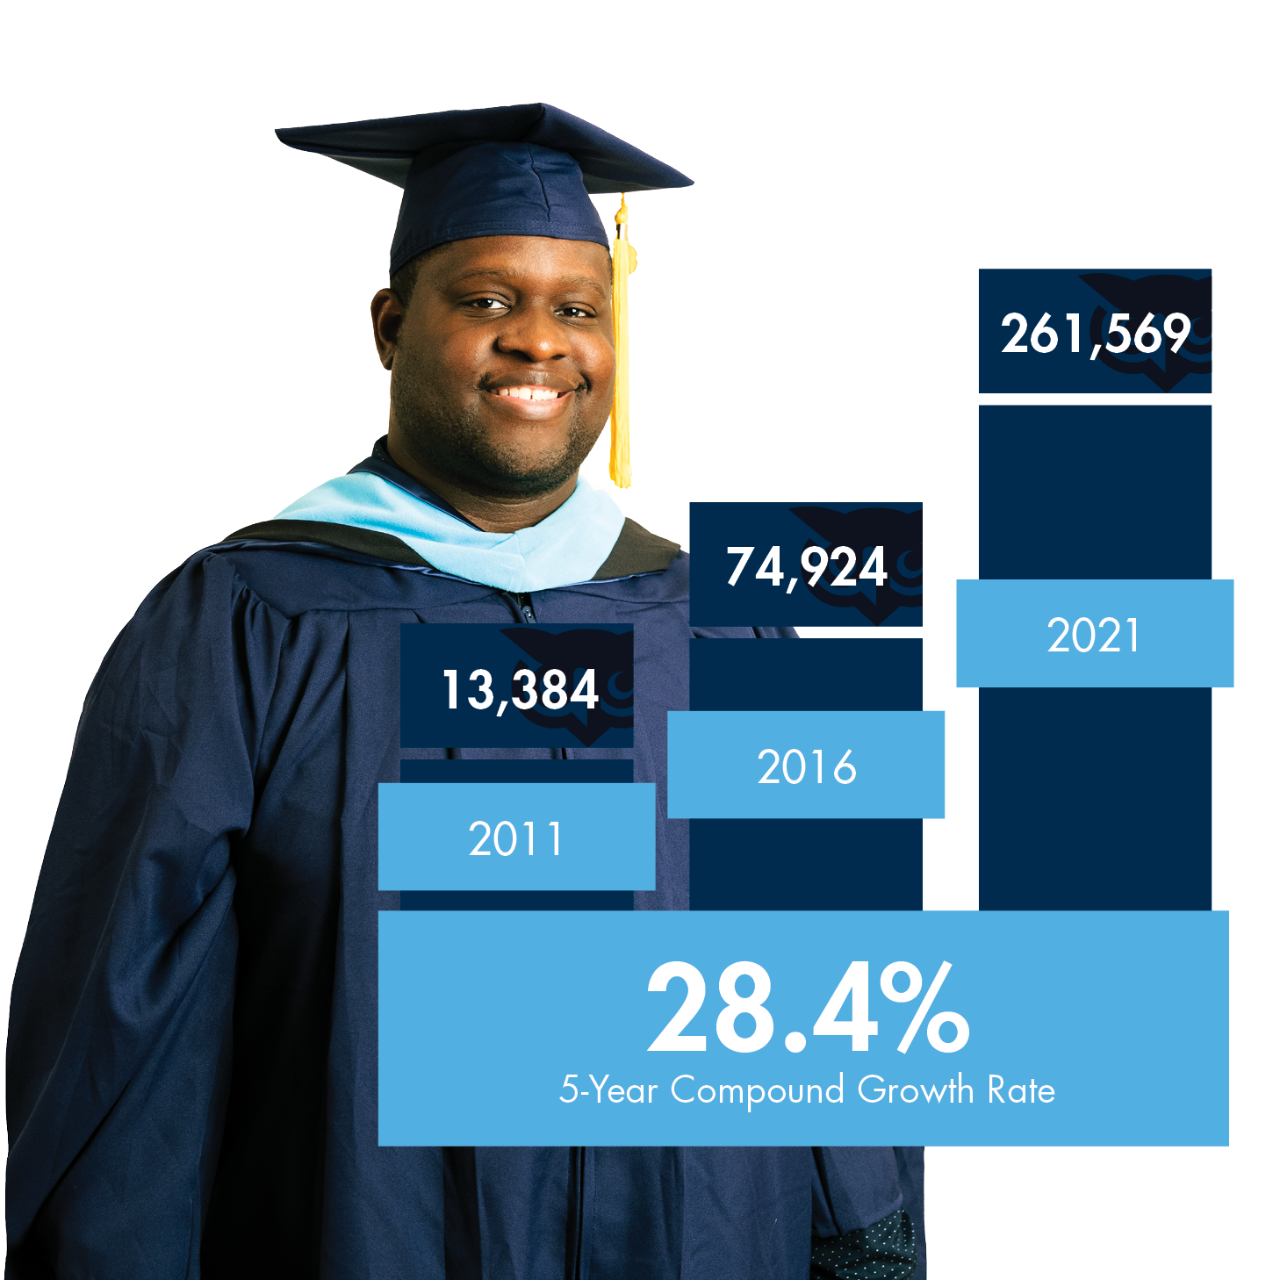 WGU's 5-year compound growth rate of graduates over time was 28.4% as of 2021.